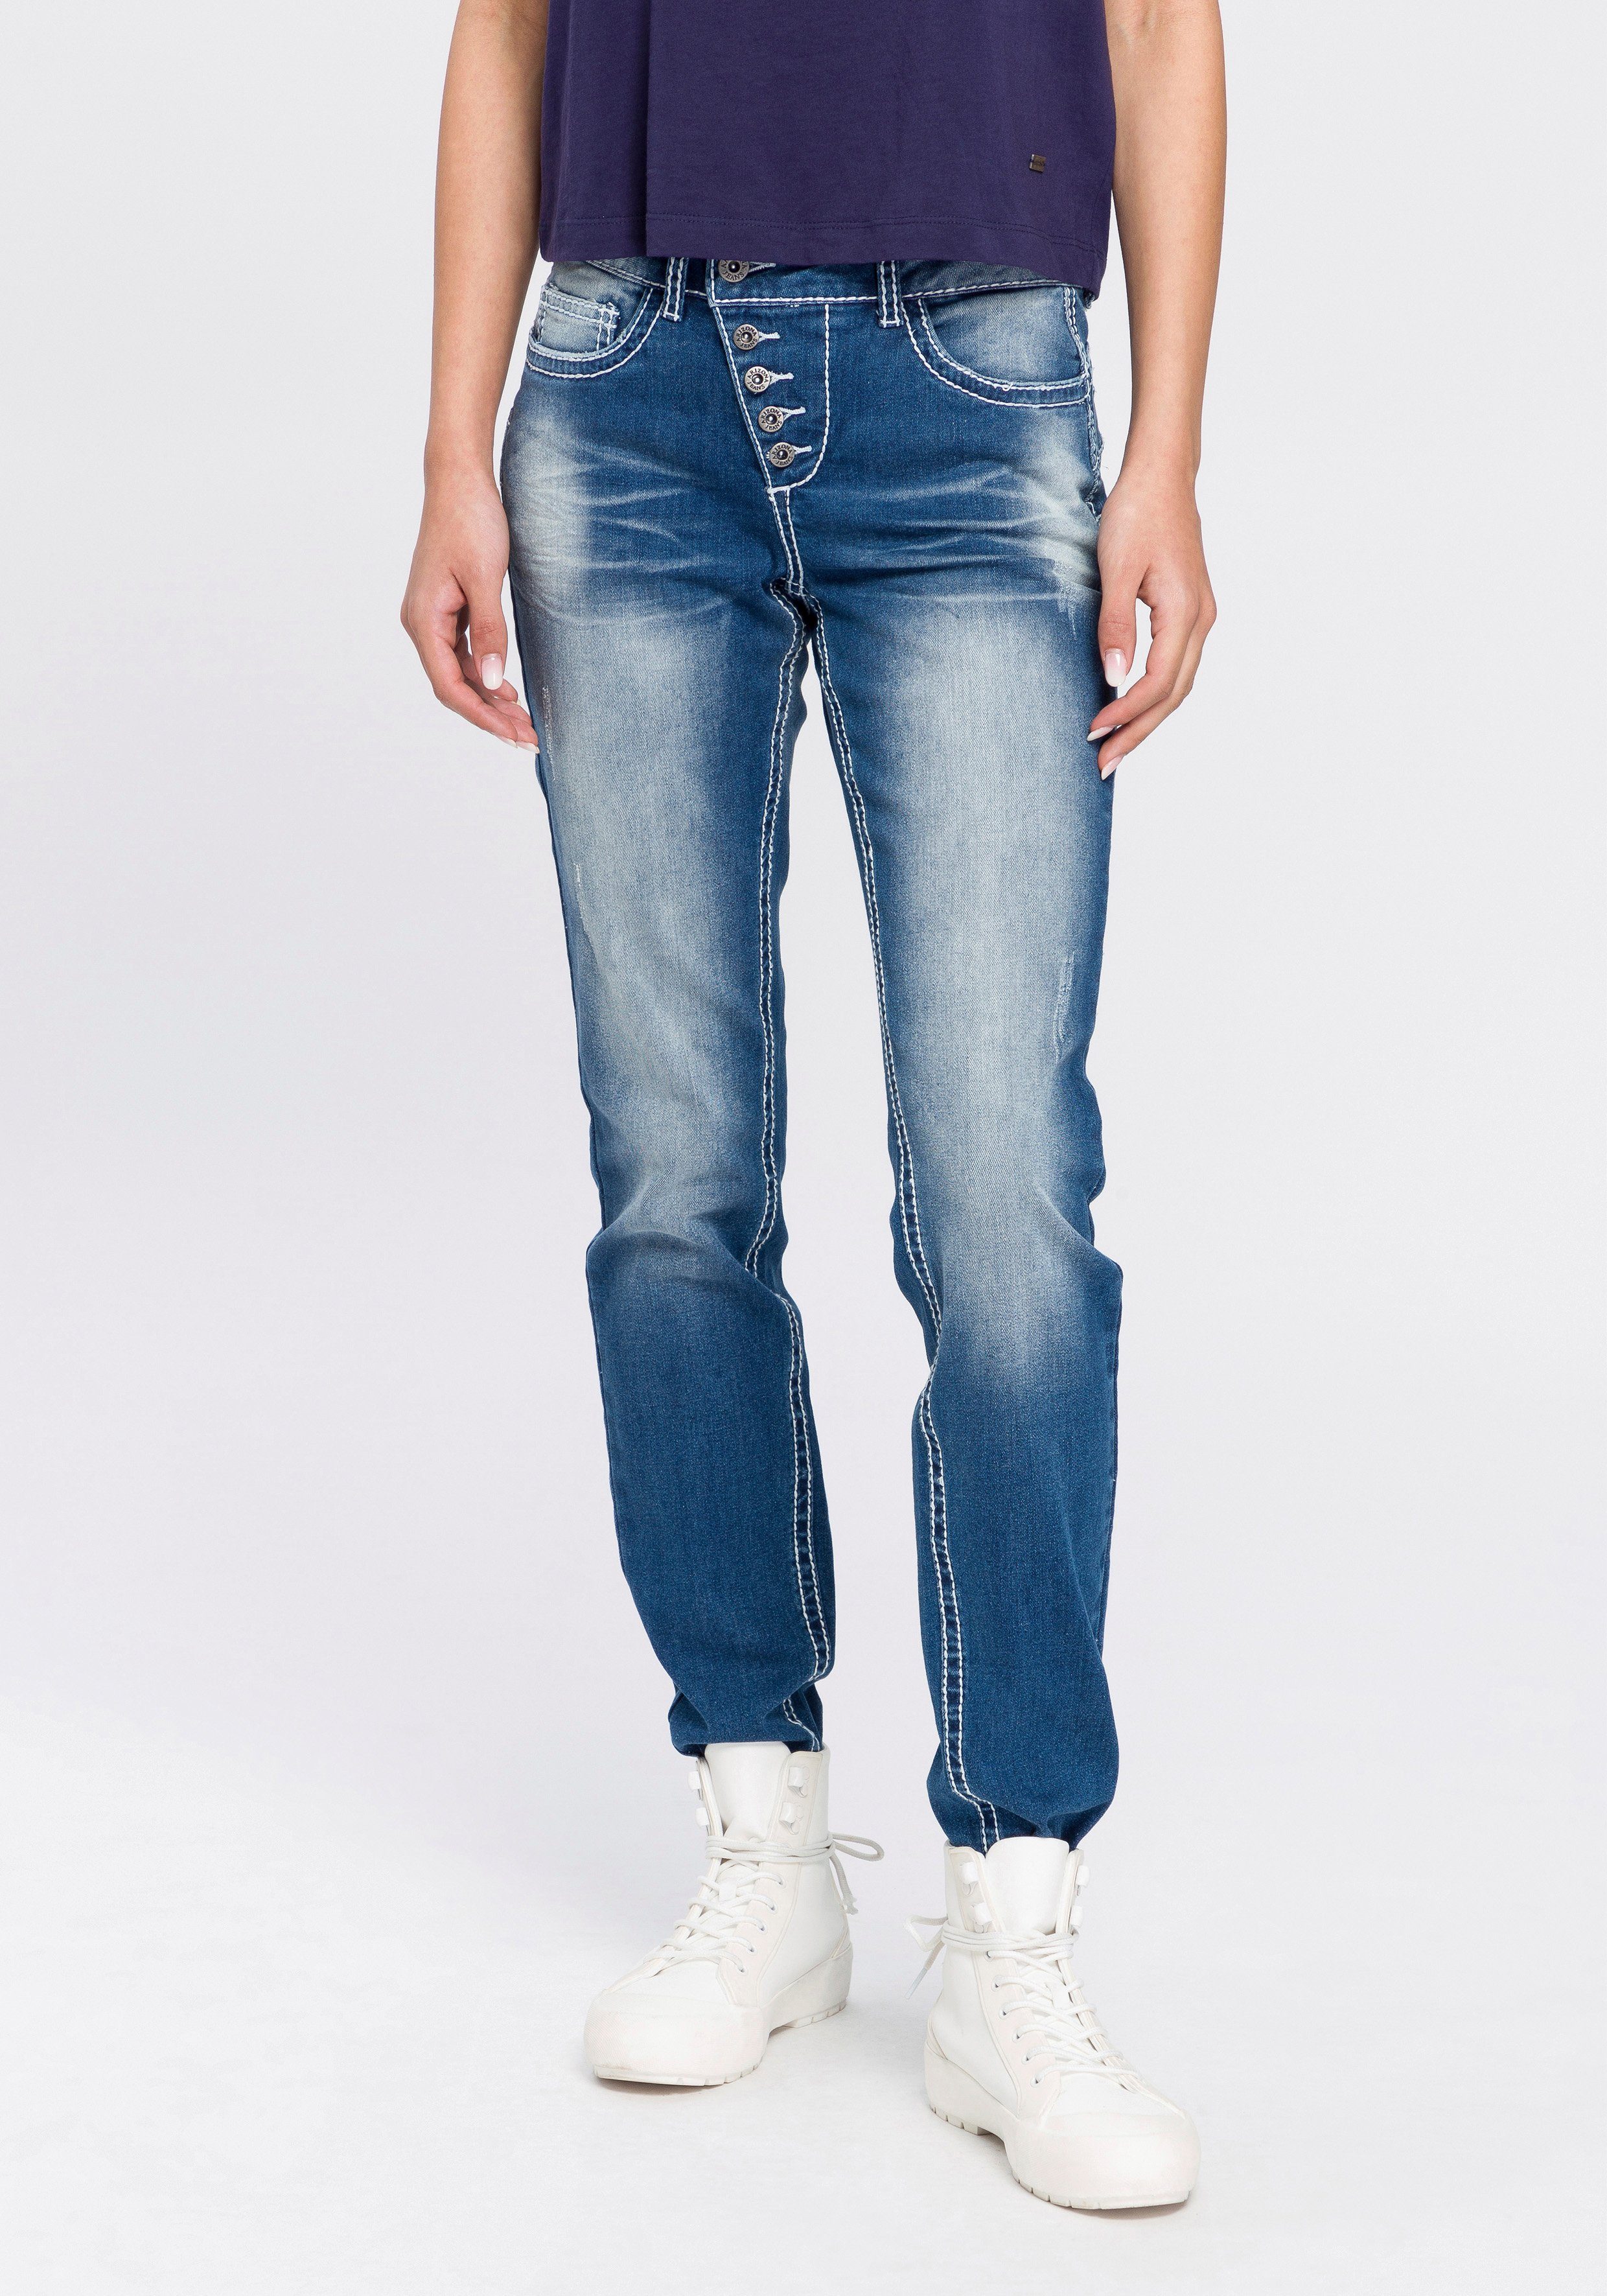 Arizona Slim fit jeans Heavy Washed - Shaping Mid waist online kopen | OTTO